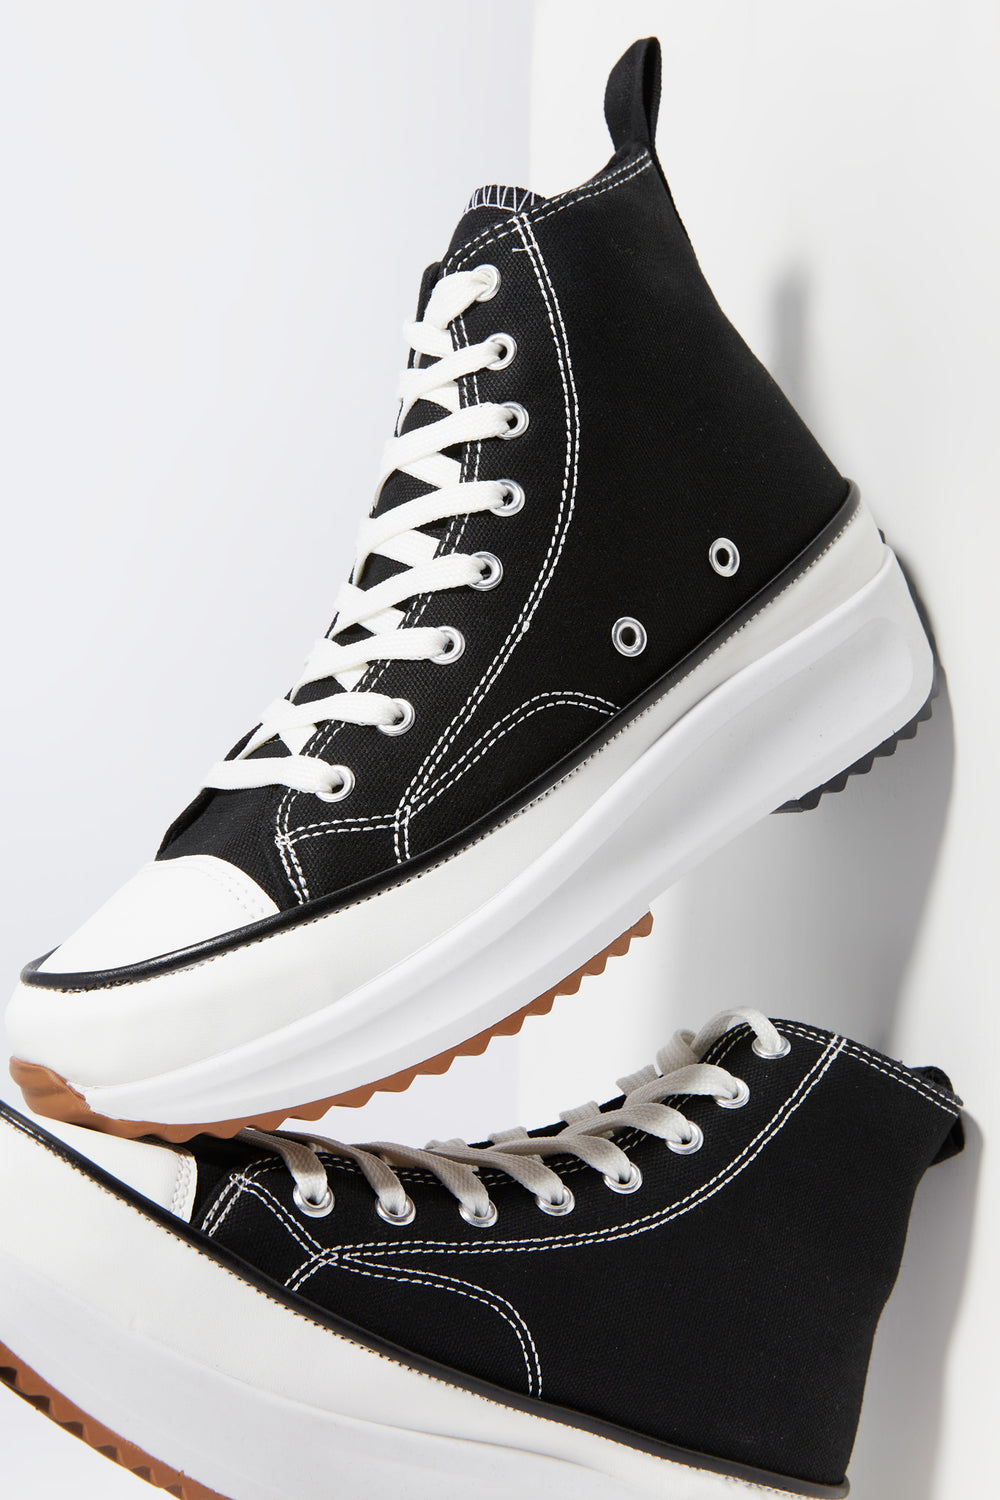 Spiked Sole Lace-Up High Top Sneaker Spiked Sole Lace-Up High Top Sneaker 1